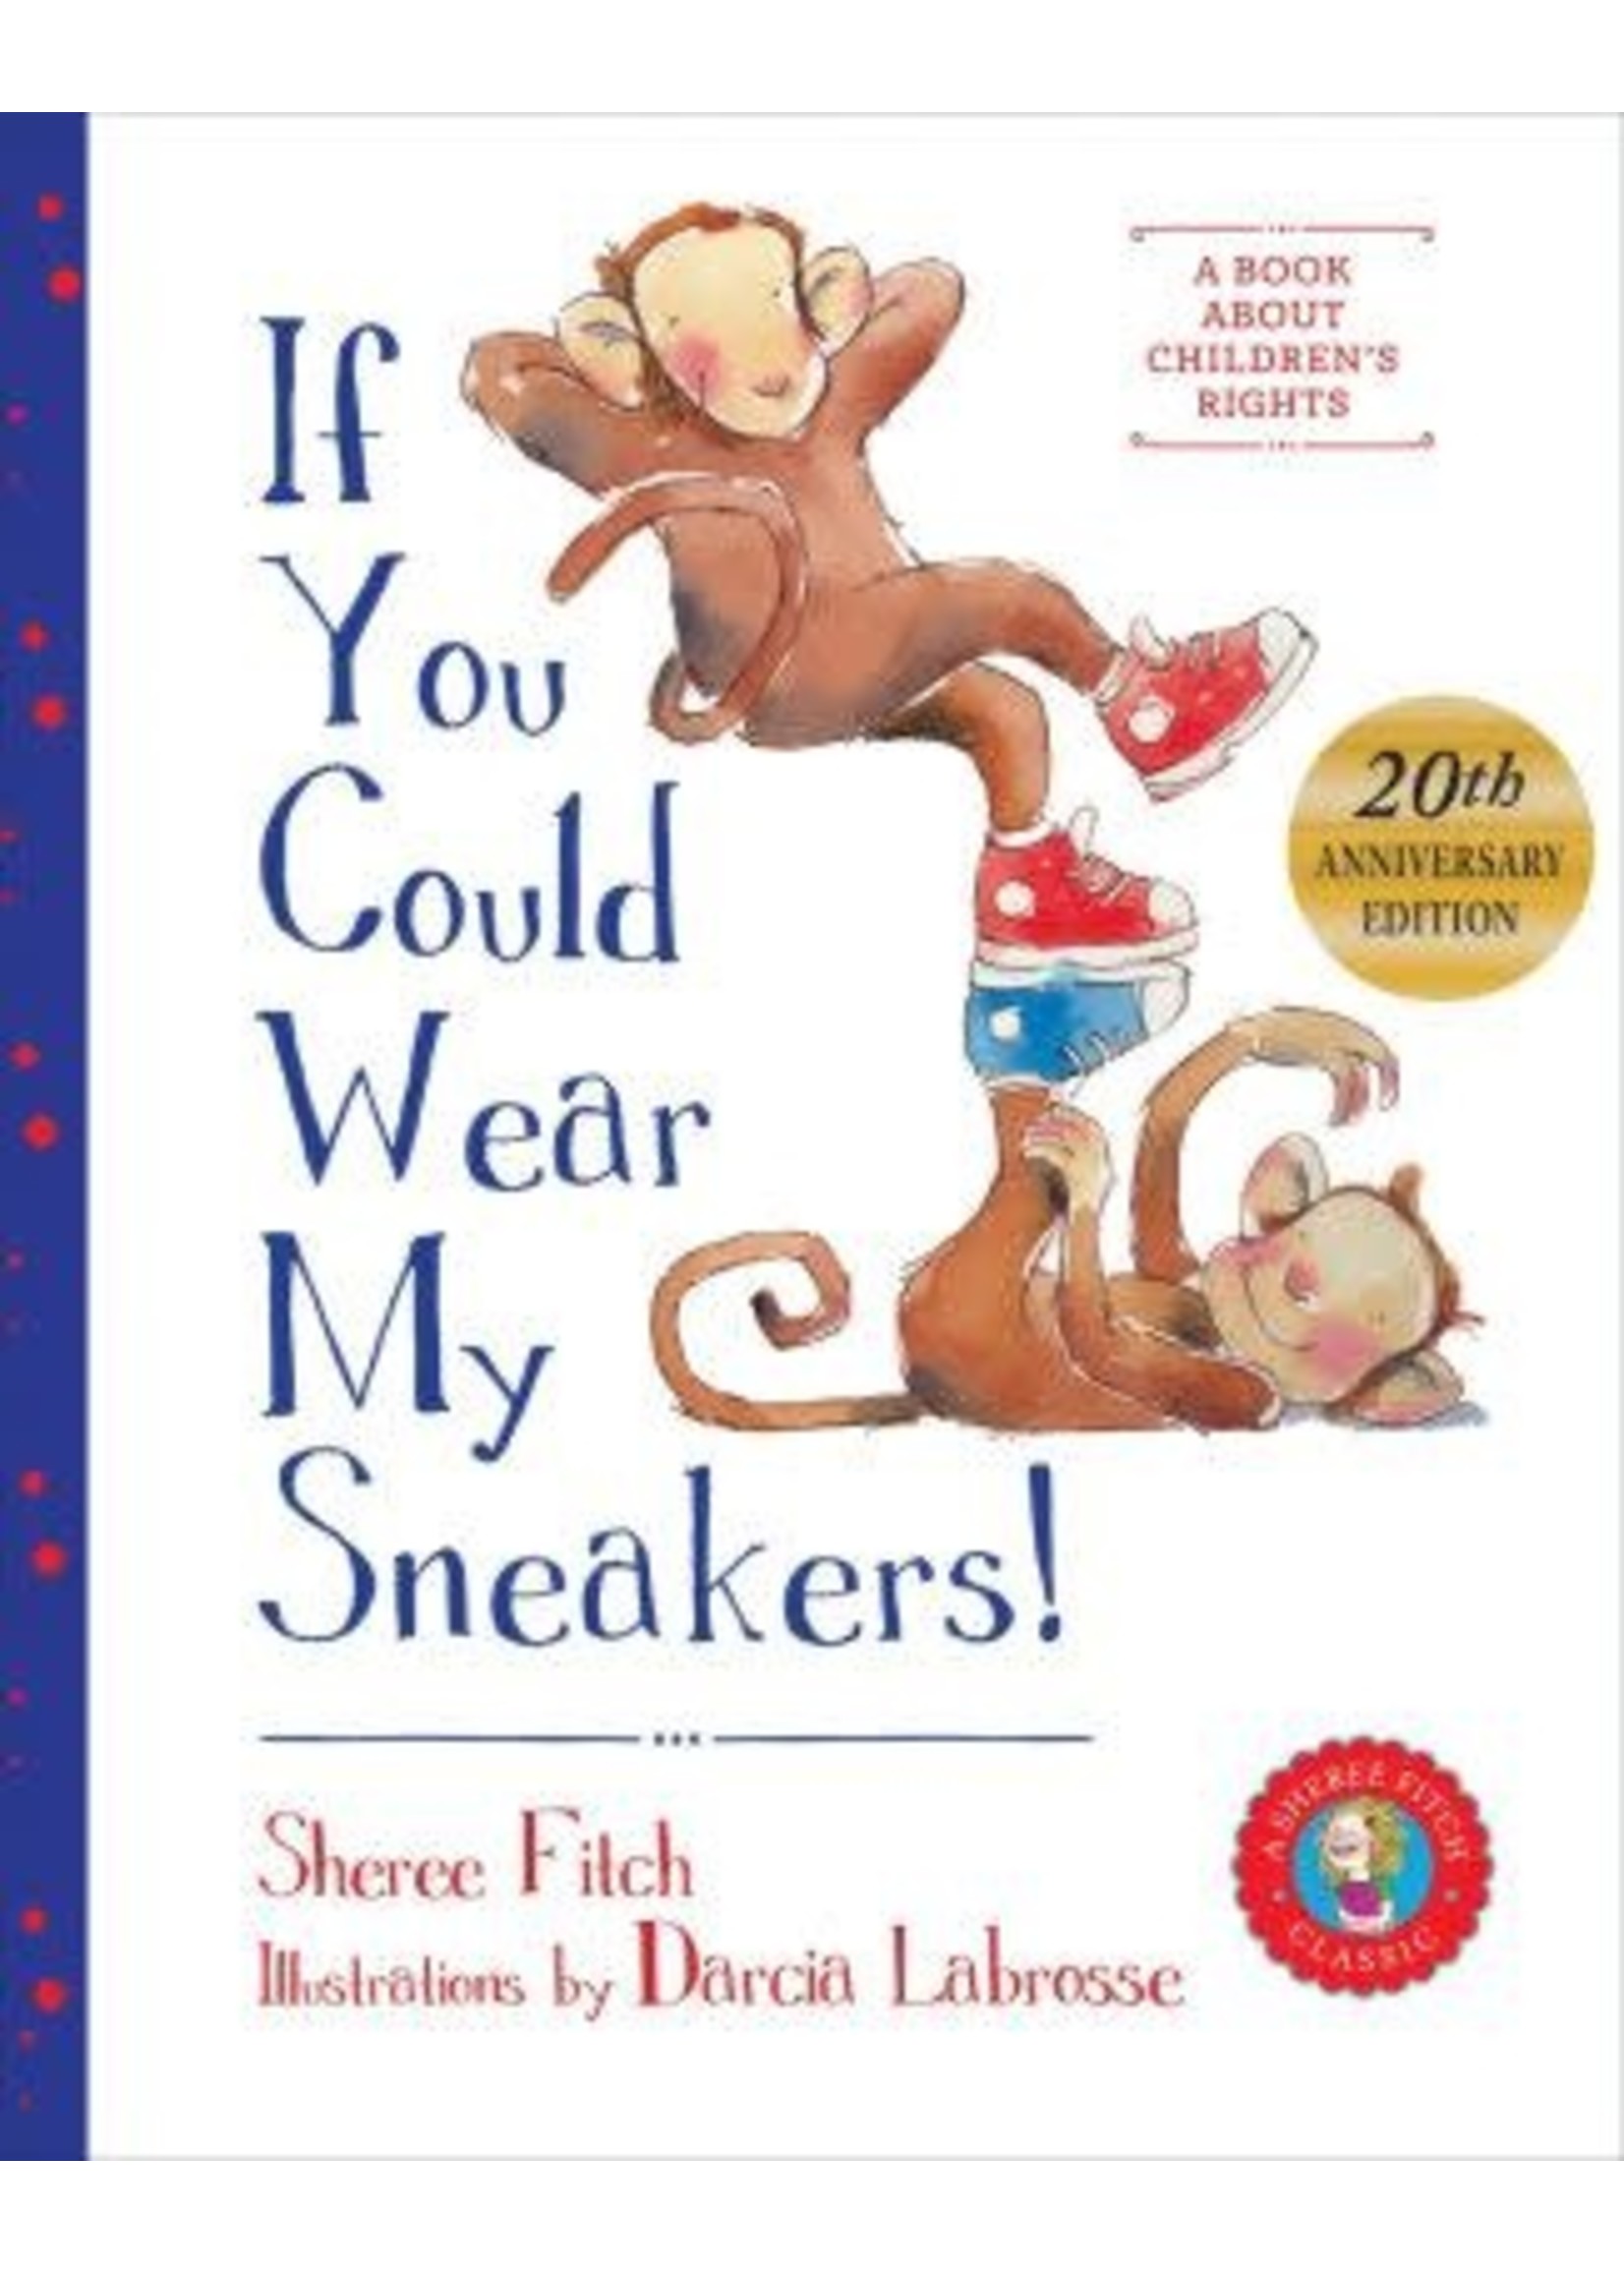 If You Could Wear My Sneakers by Sheree Fitch